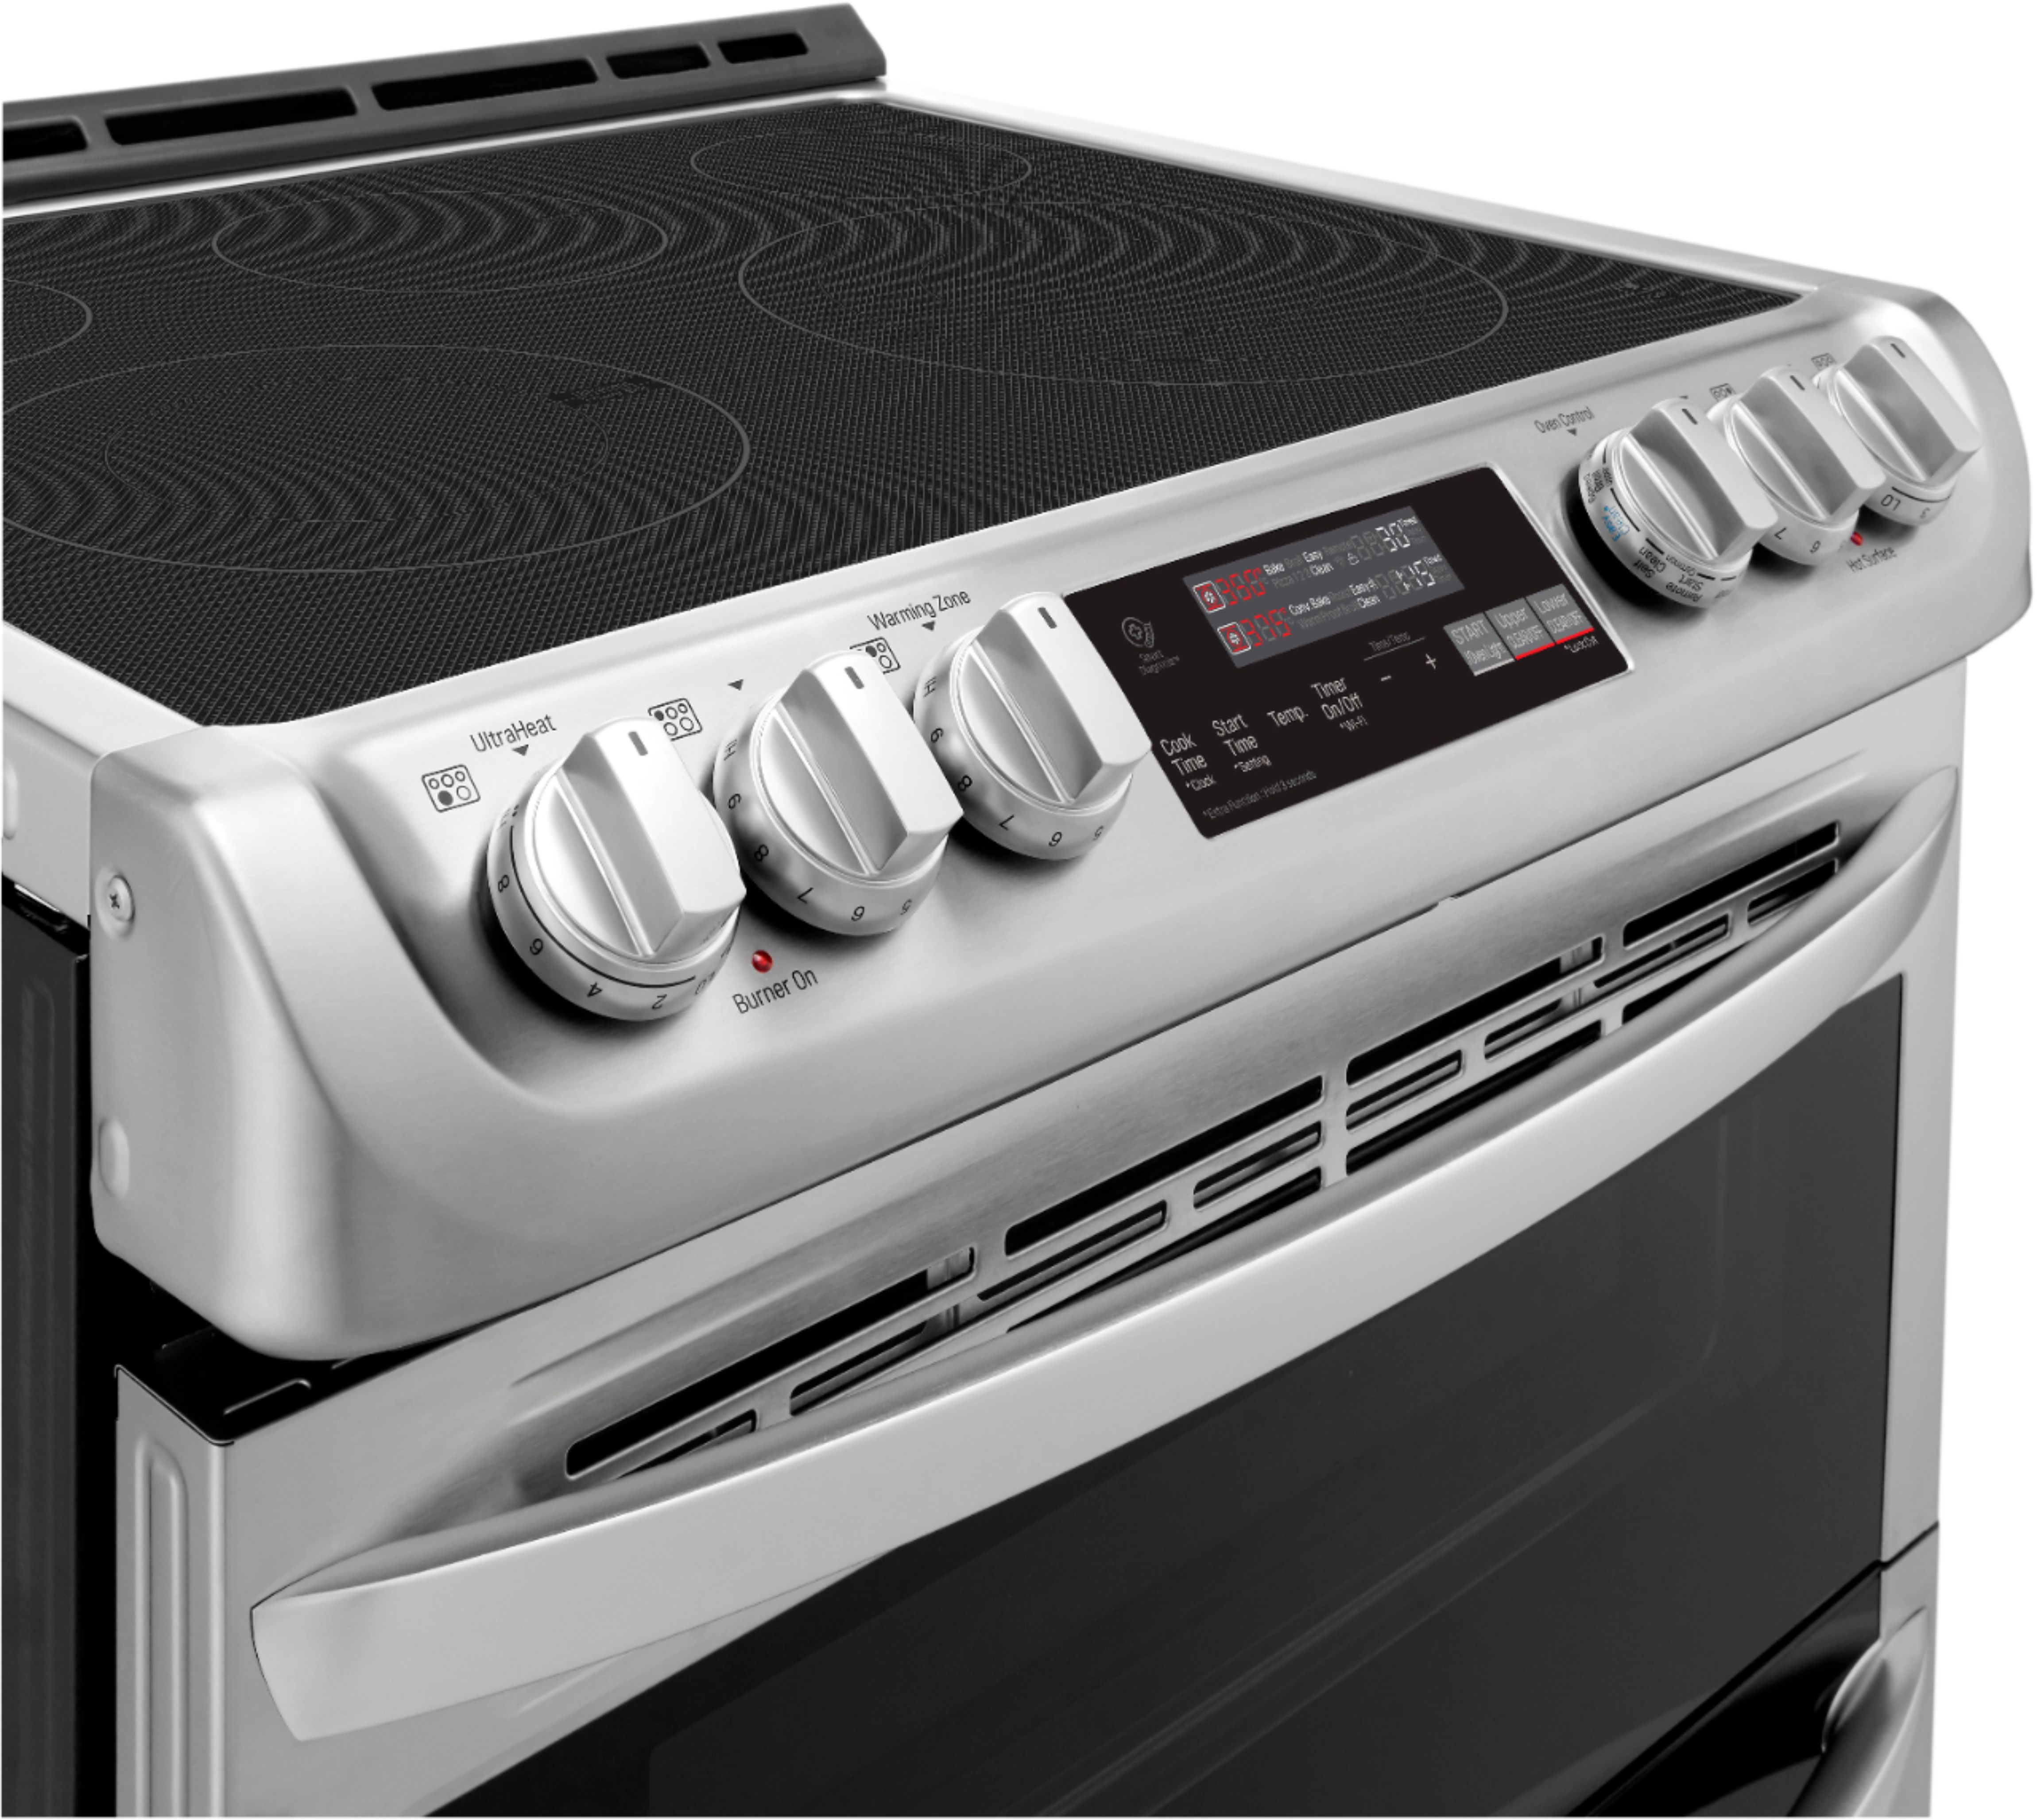 LG Electric Double Oven Slide-In Range